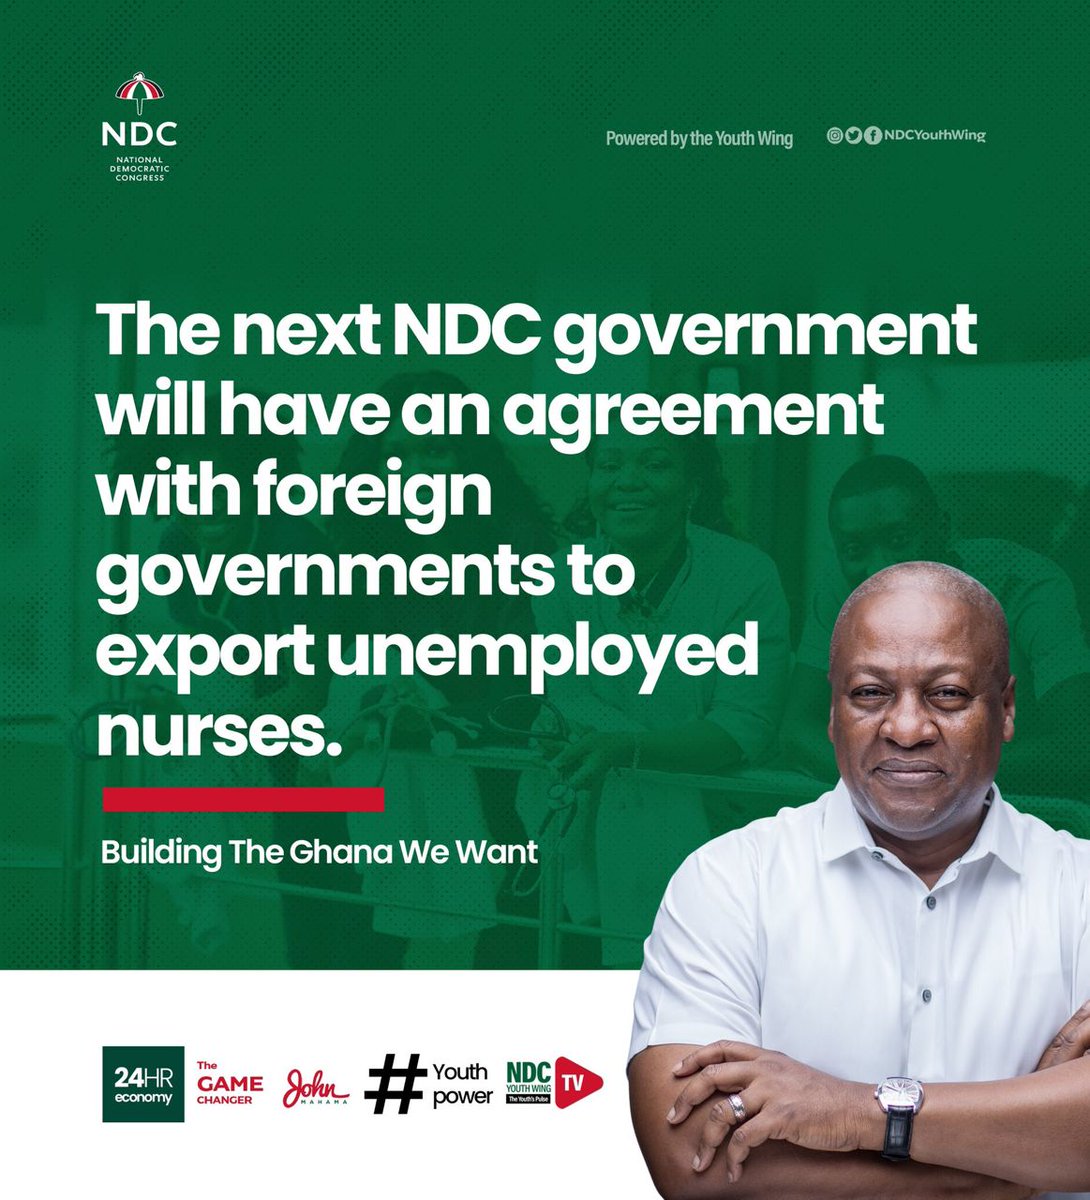 The next  NDC government, led by John Mahama, aims to partner with foreign governments to create overseas job opportunities for Ghana's skilled but unemployed nursing professionals.
#ChangeIsComing 
#24HourEconomy